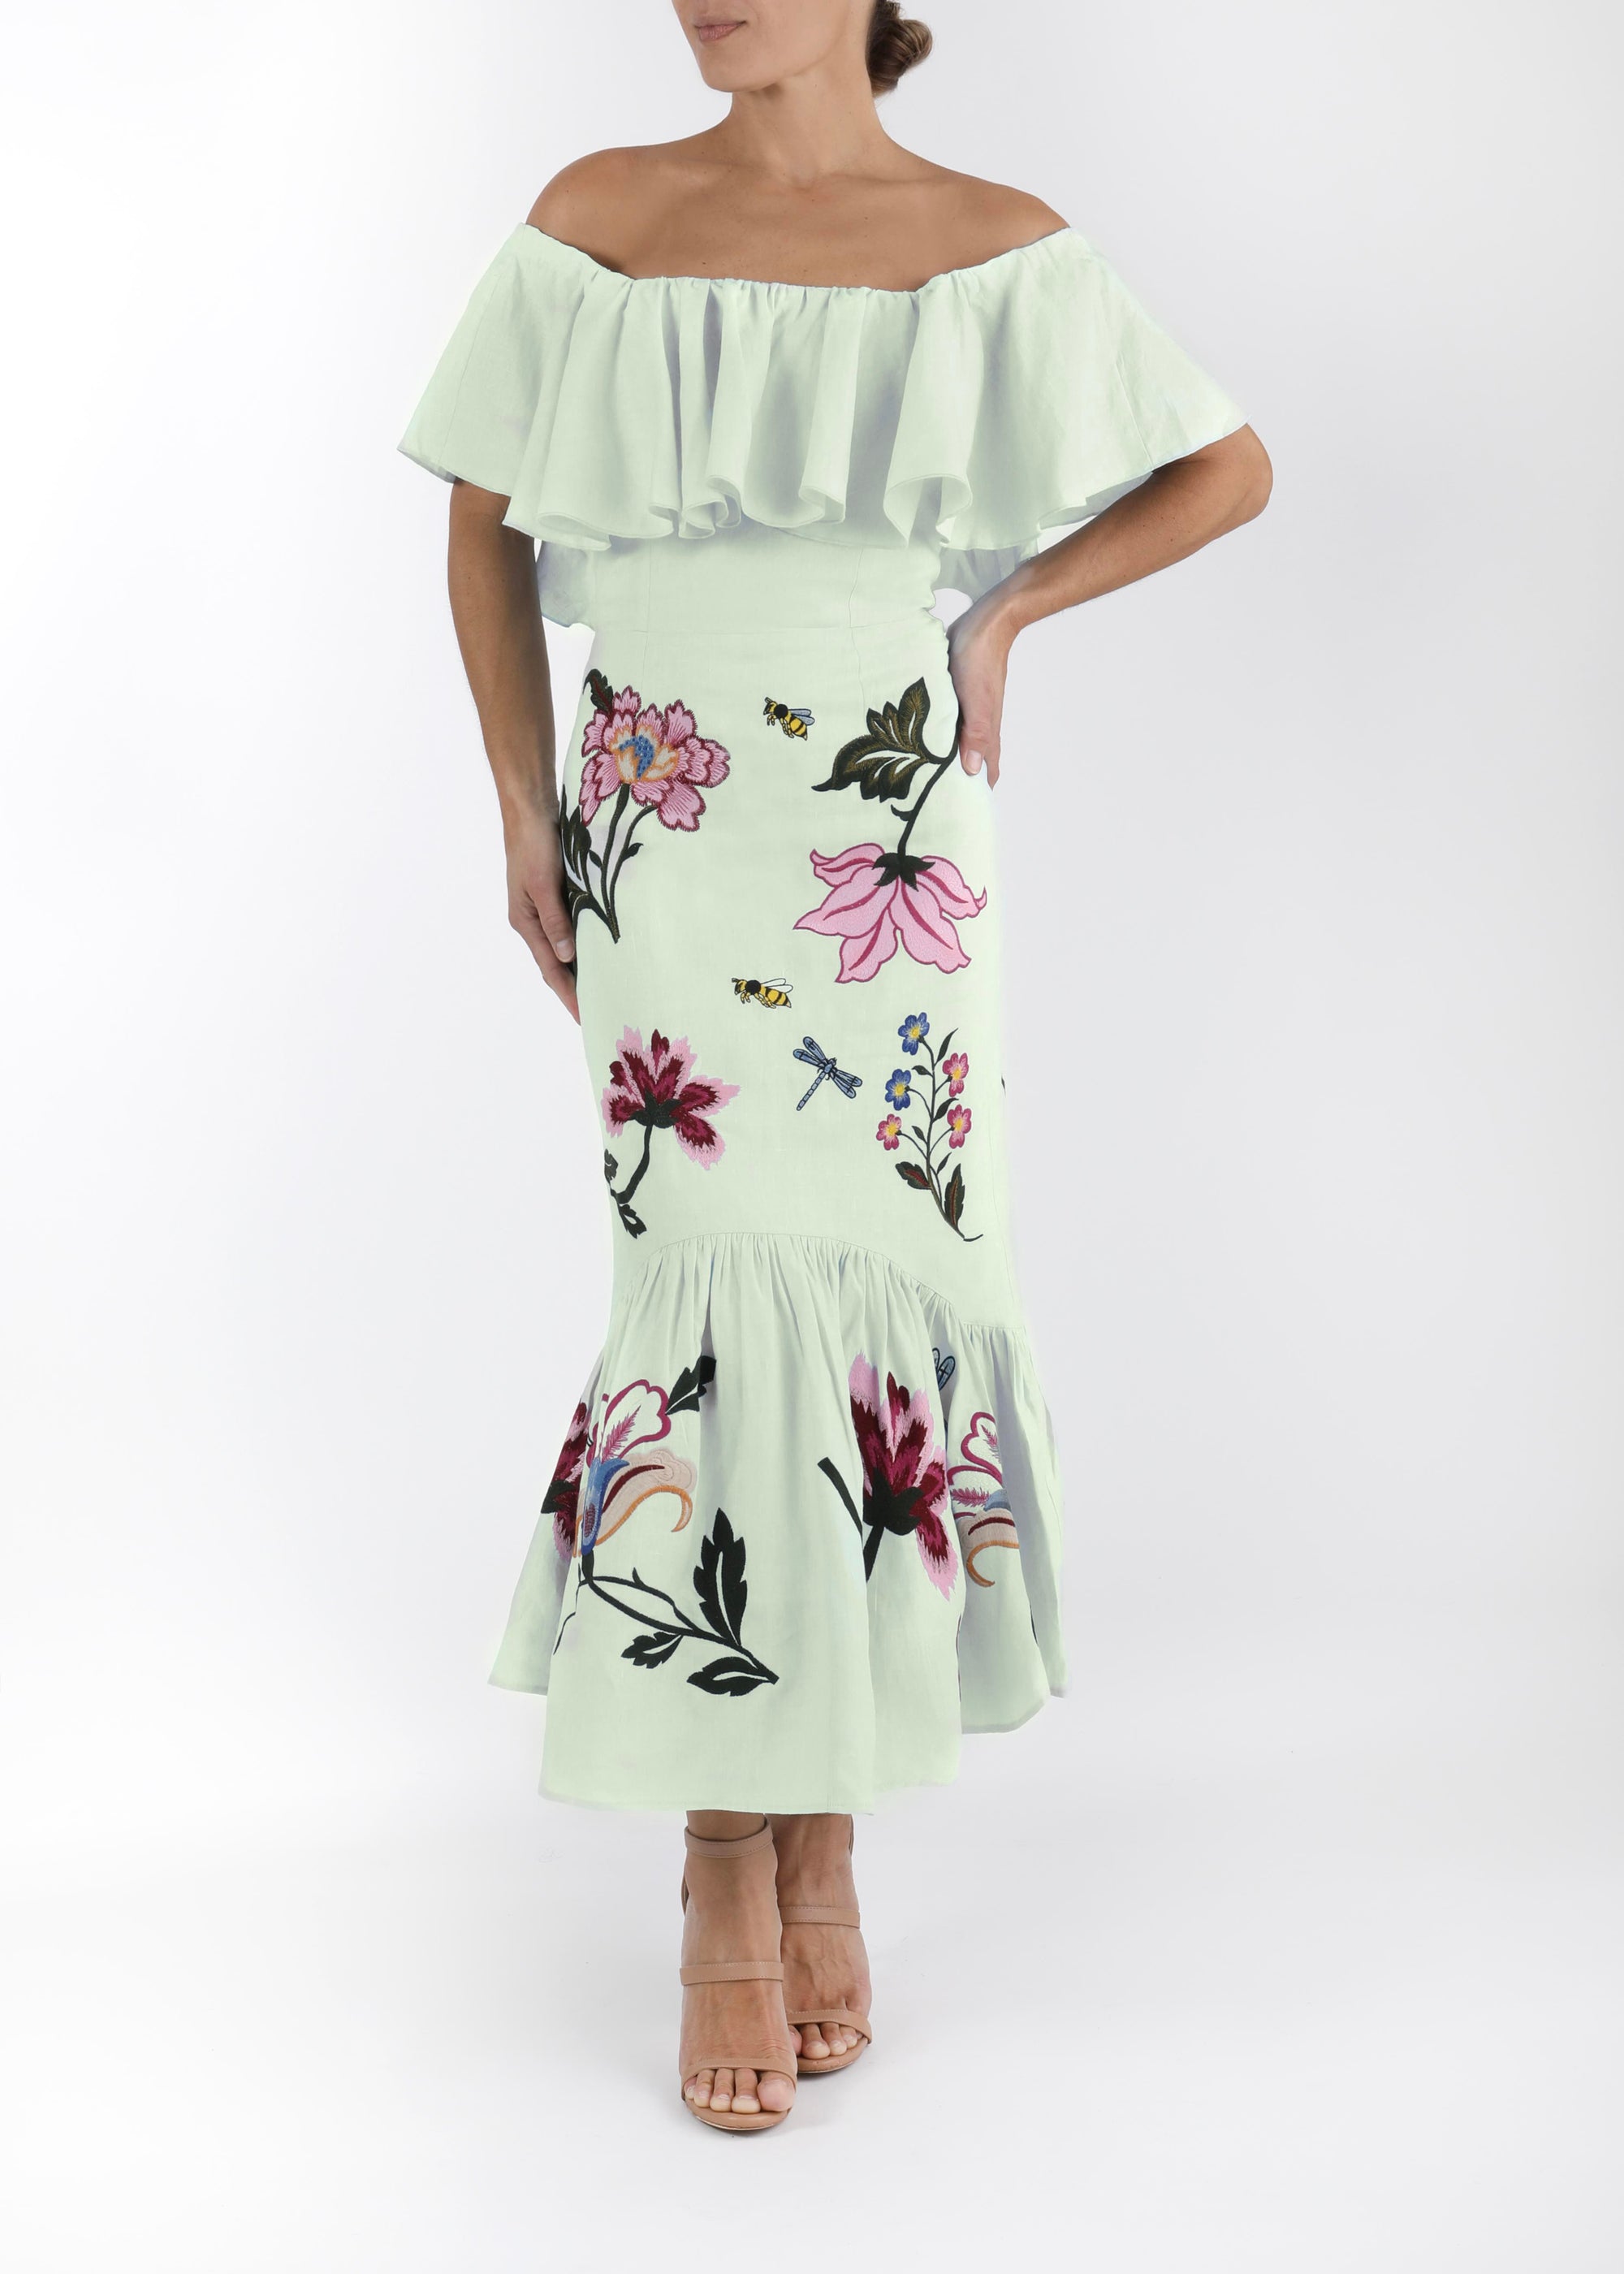 Fanm Mon and Over the Moon Clarissa Mint Green Dress